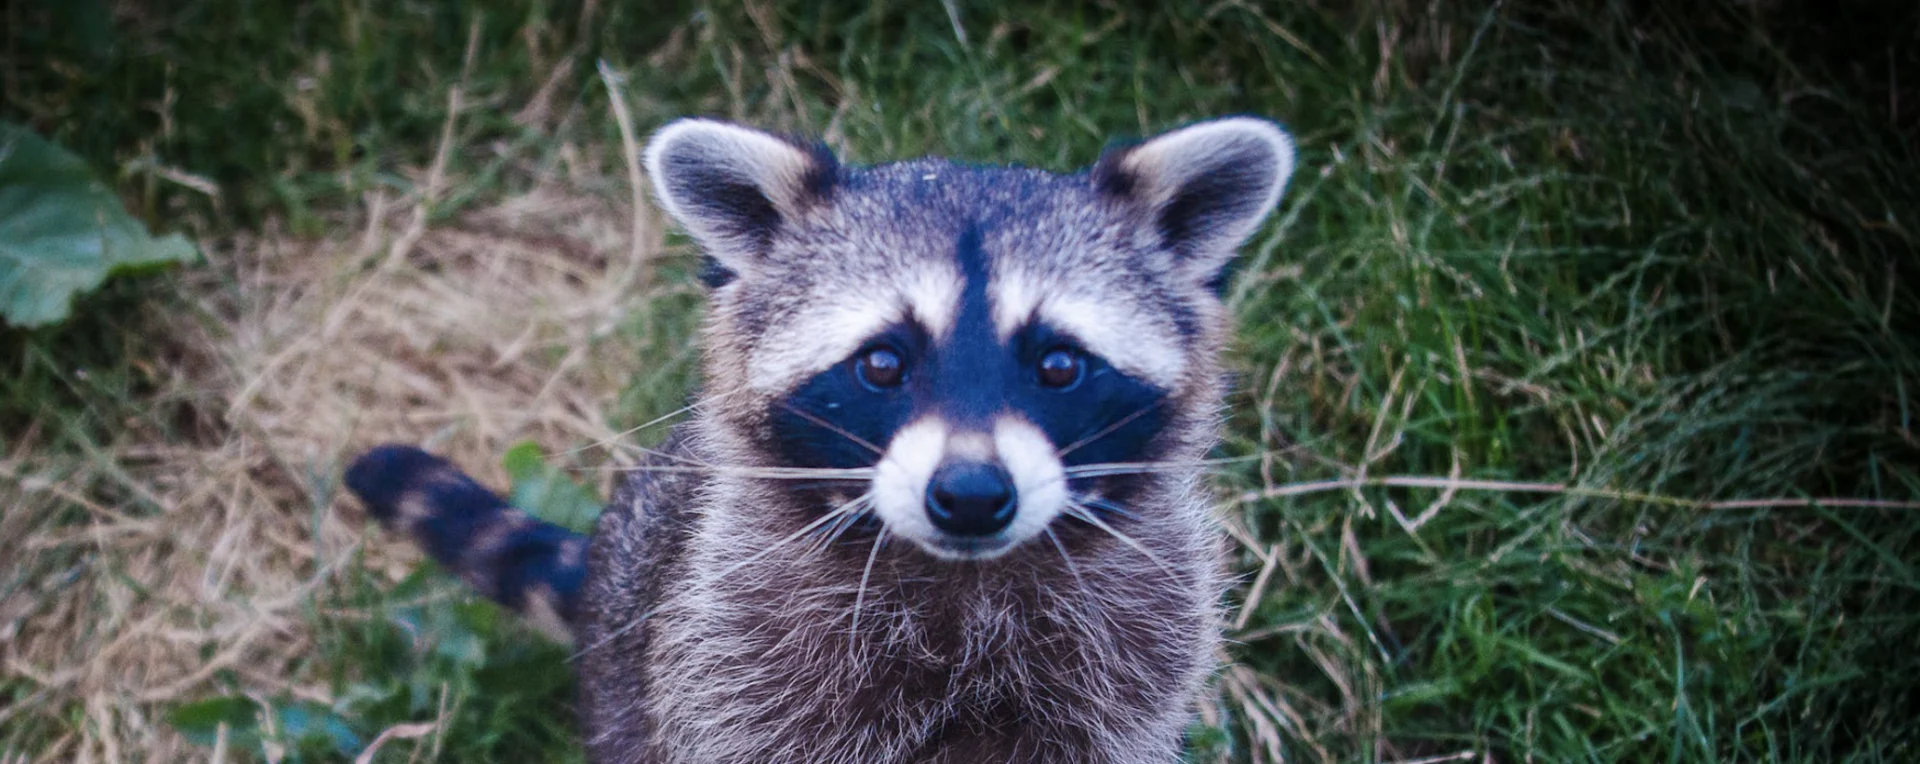 Pexels/Free to use/ anne sch: Racoon found on lawn - Thumb crop. Link: https://www.pexels.com/photo/brown-and-black-raccoon-photo-634255/